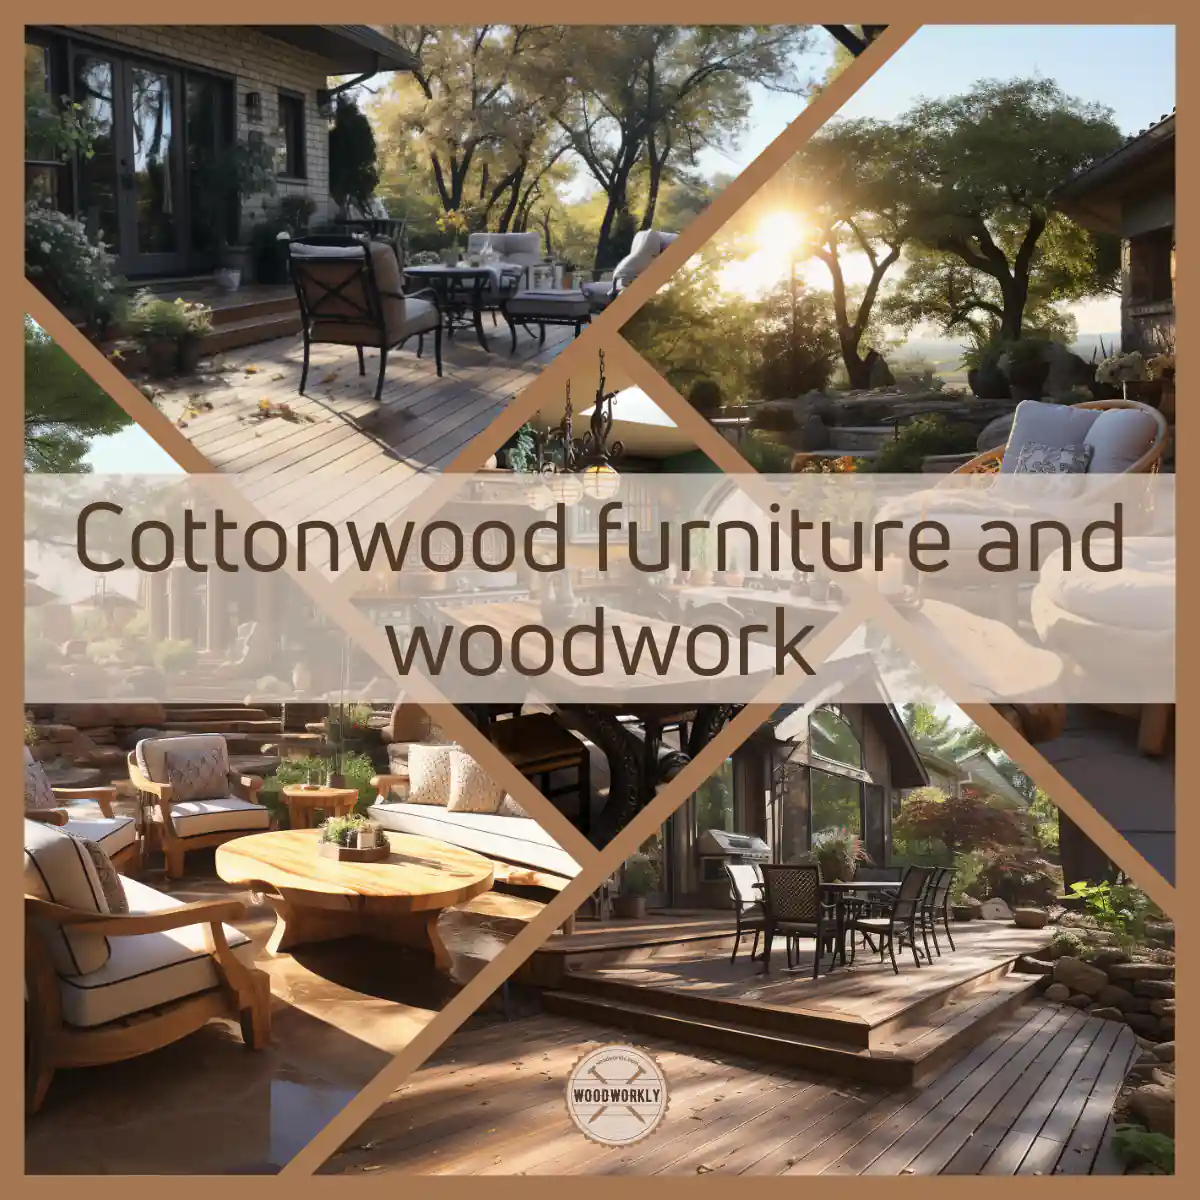 Cottonwood furniture and woodwork